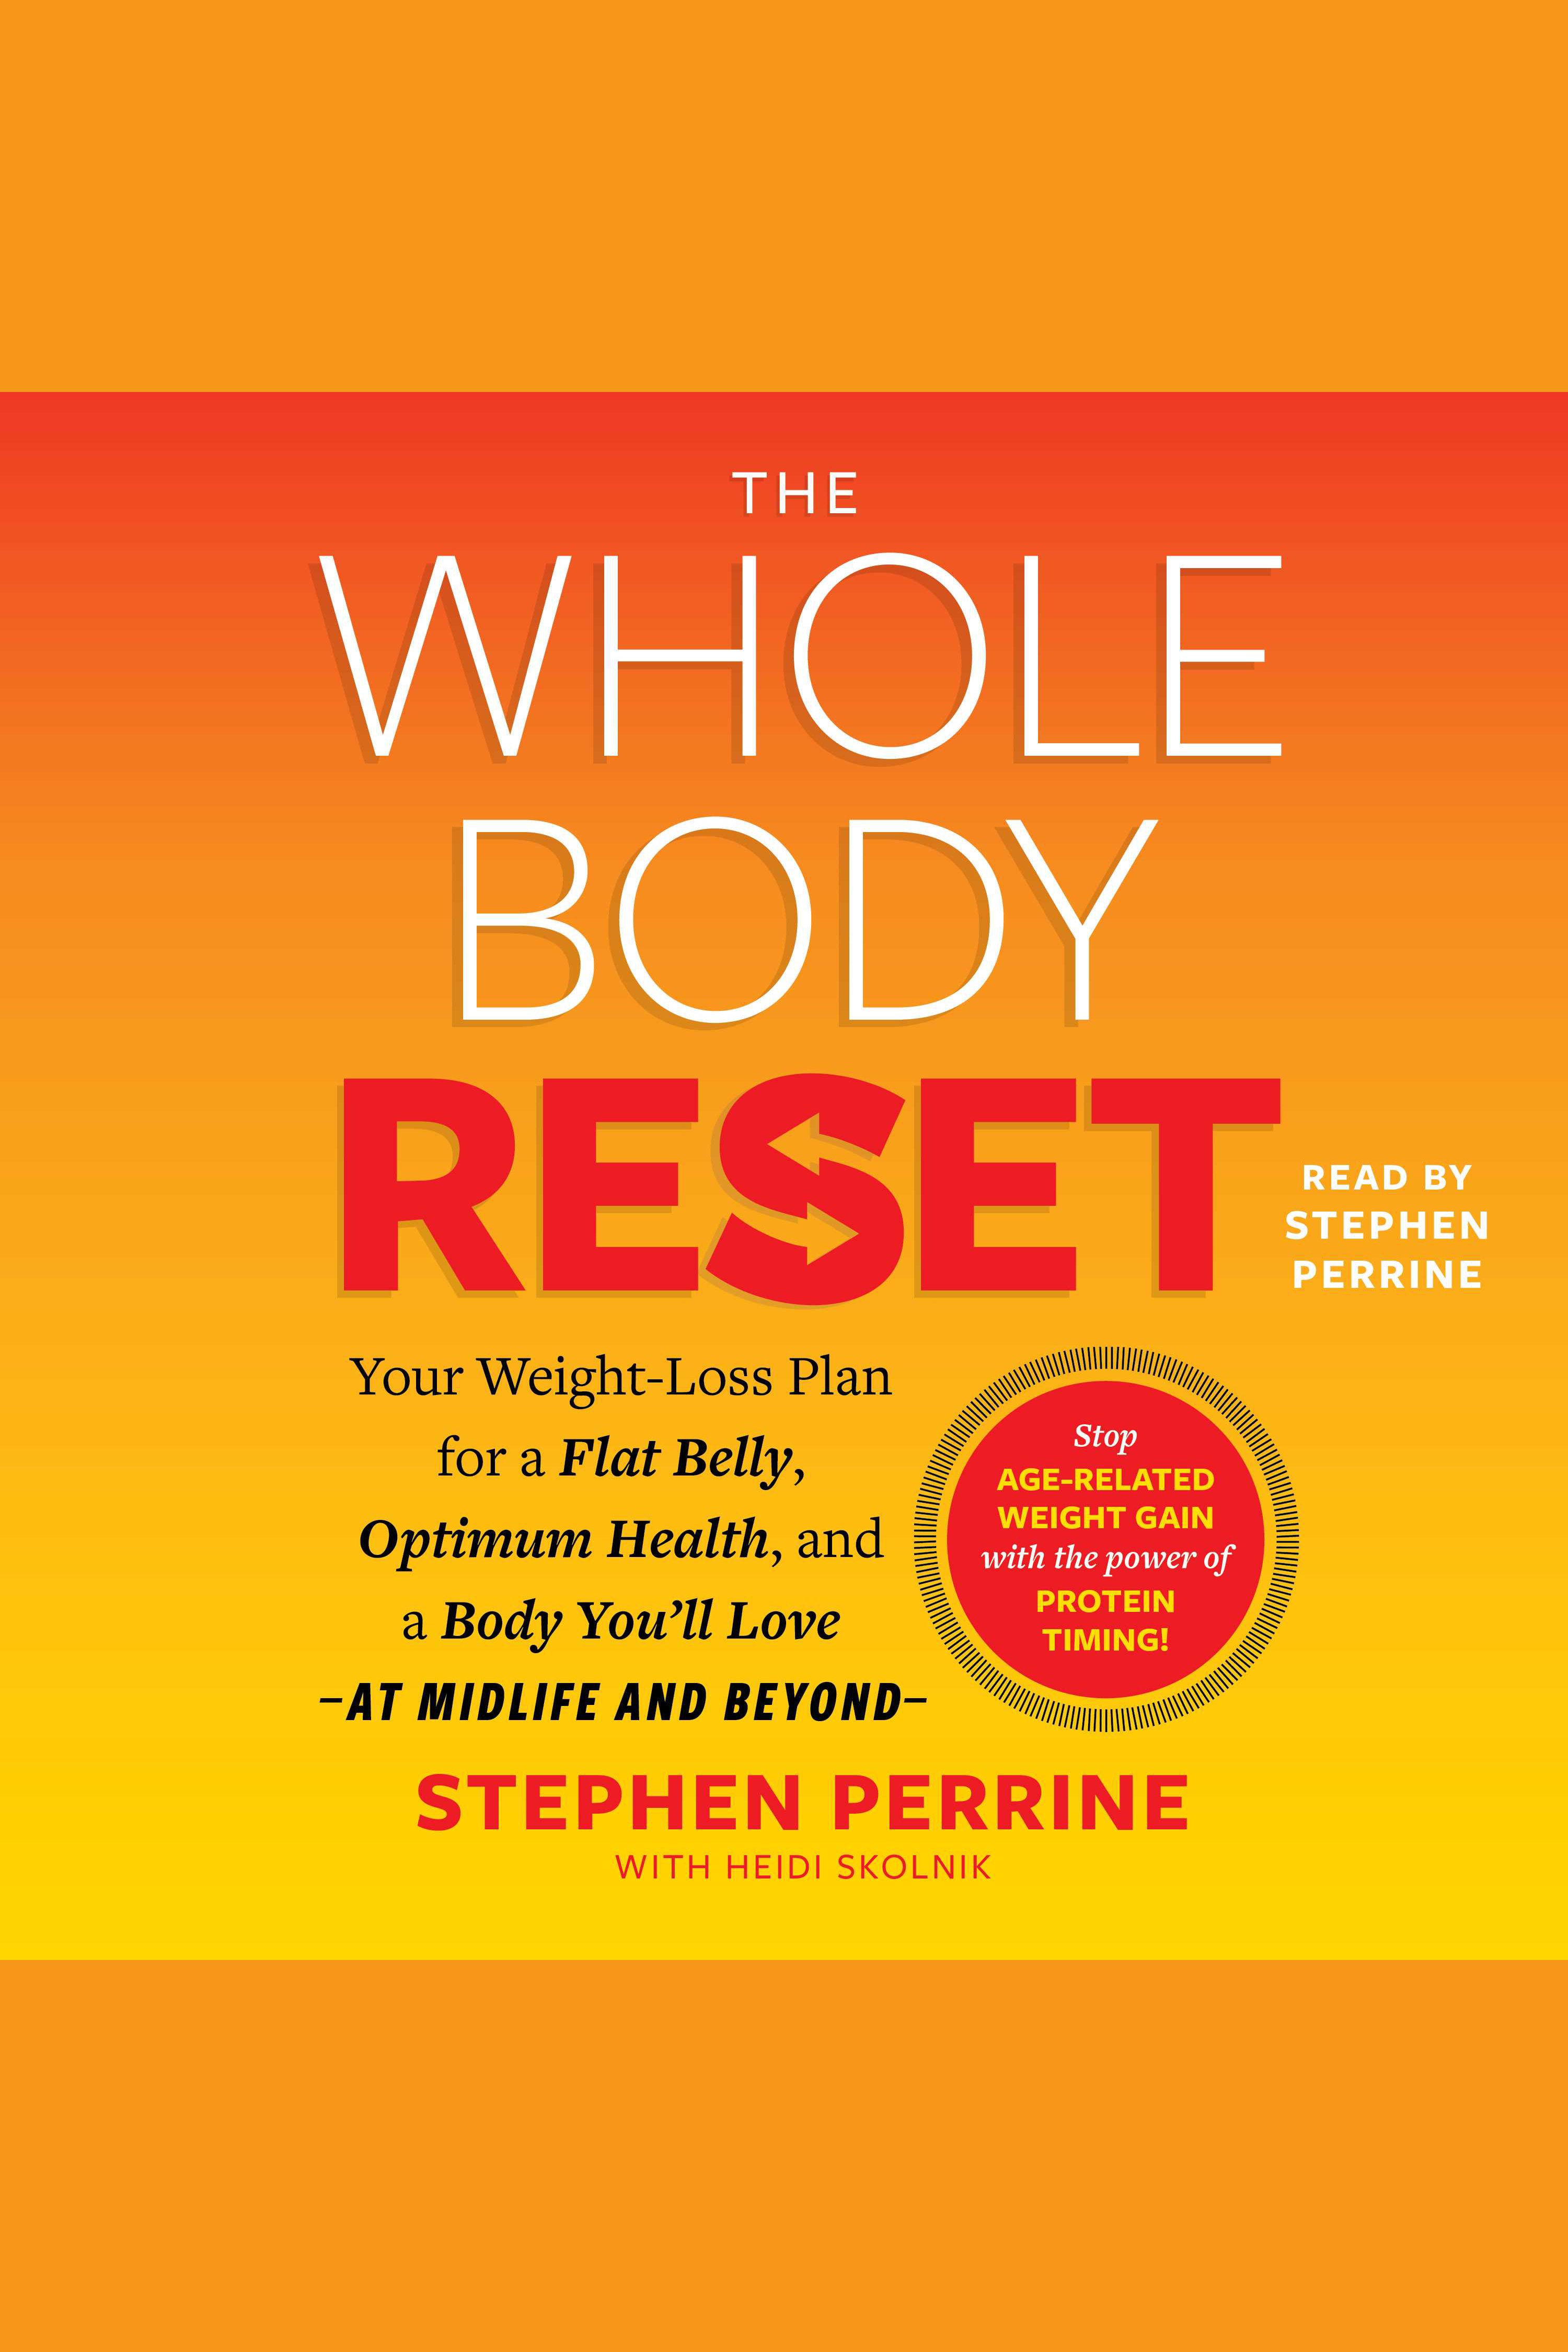 The Whole Body Reset Your Weight-Loss Plan for a Flat Belly, Optimum Health and a Body  You'll Love - at Midlife and Beyond cover image